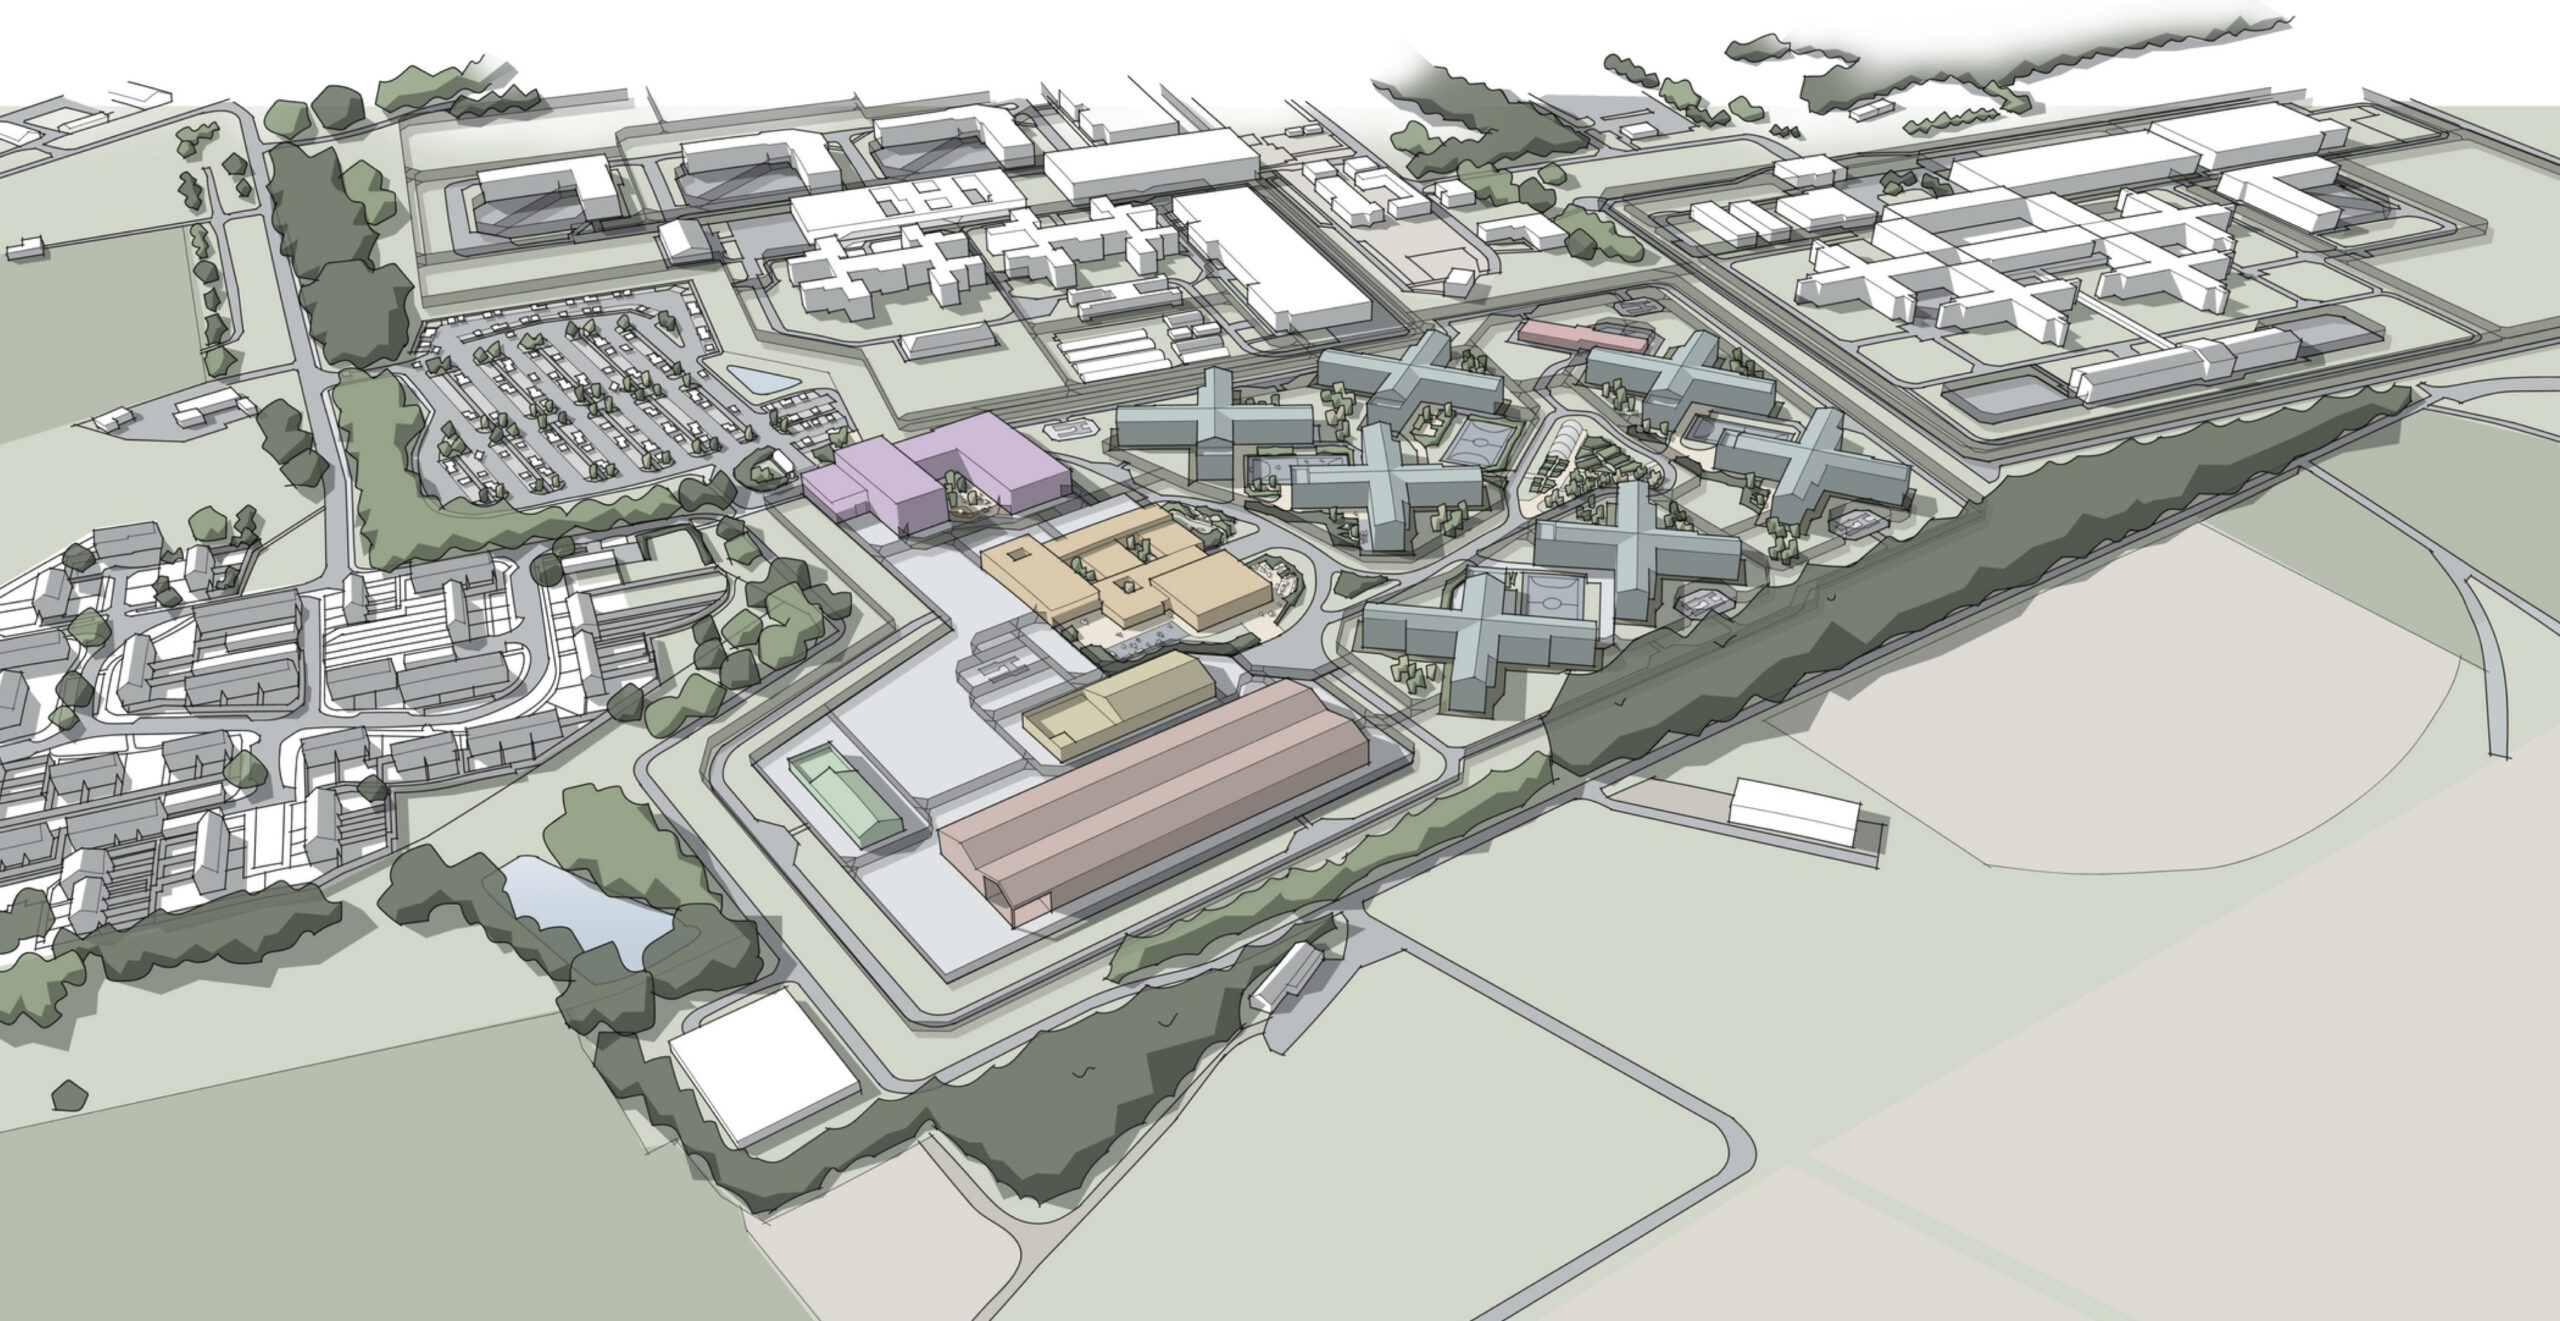 Image shows a drawing of the proposed Chorley mega prison